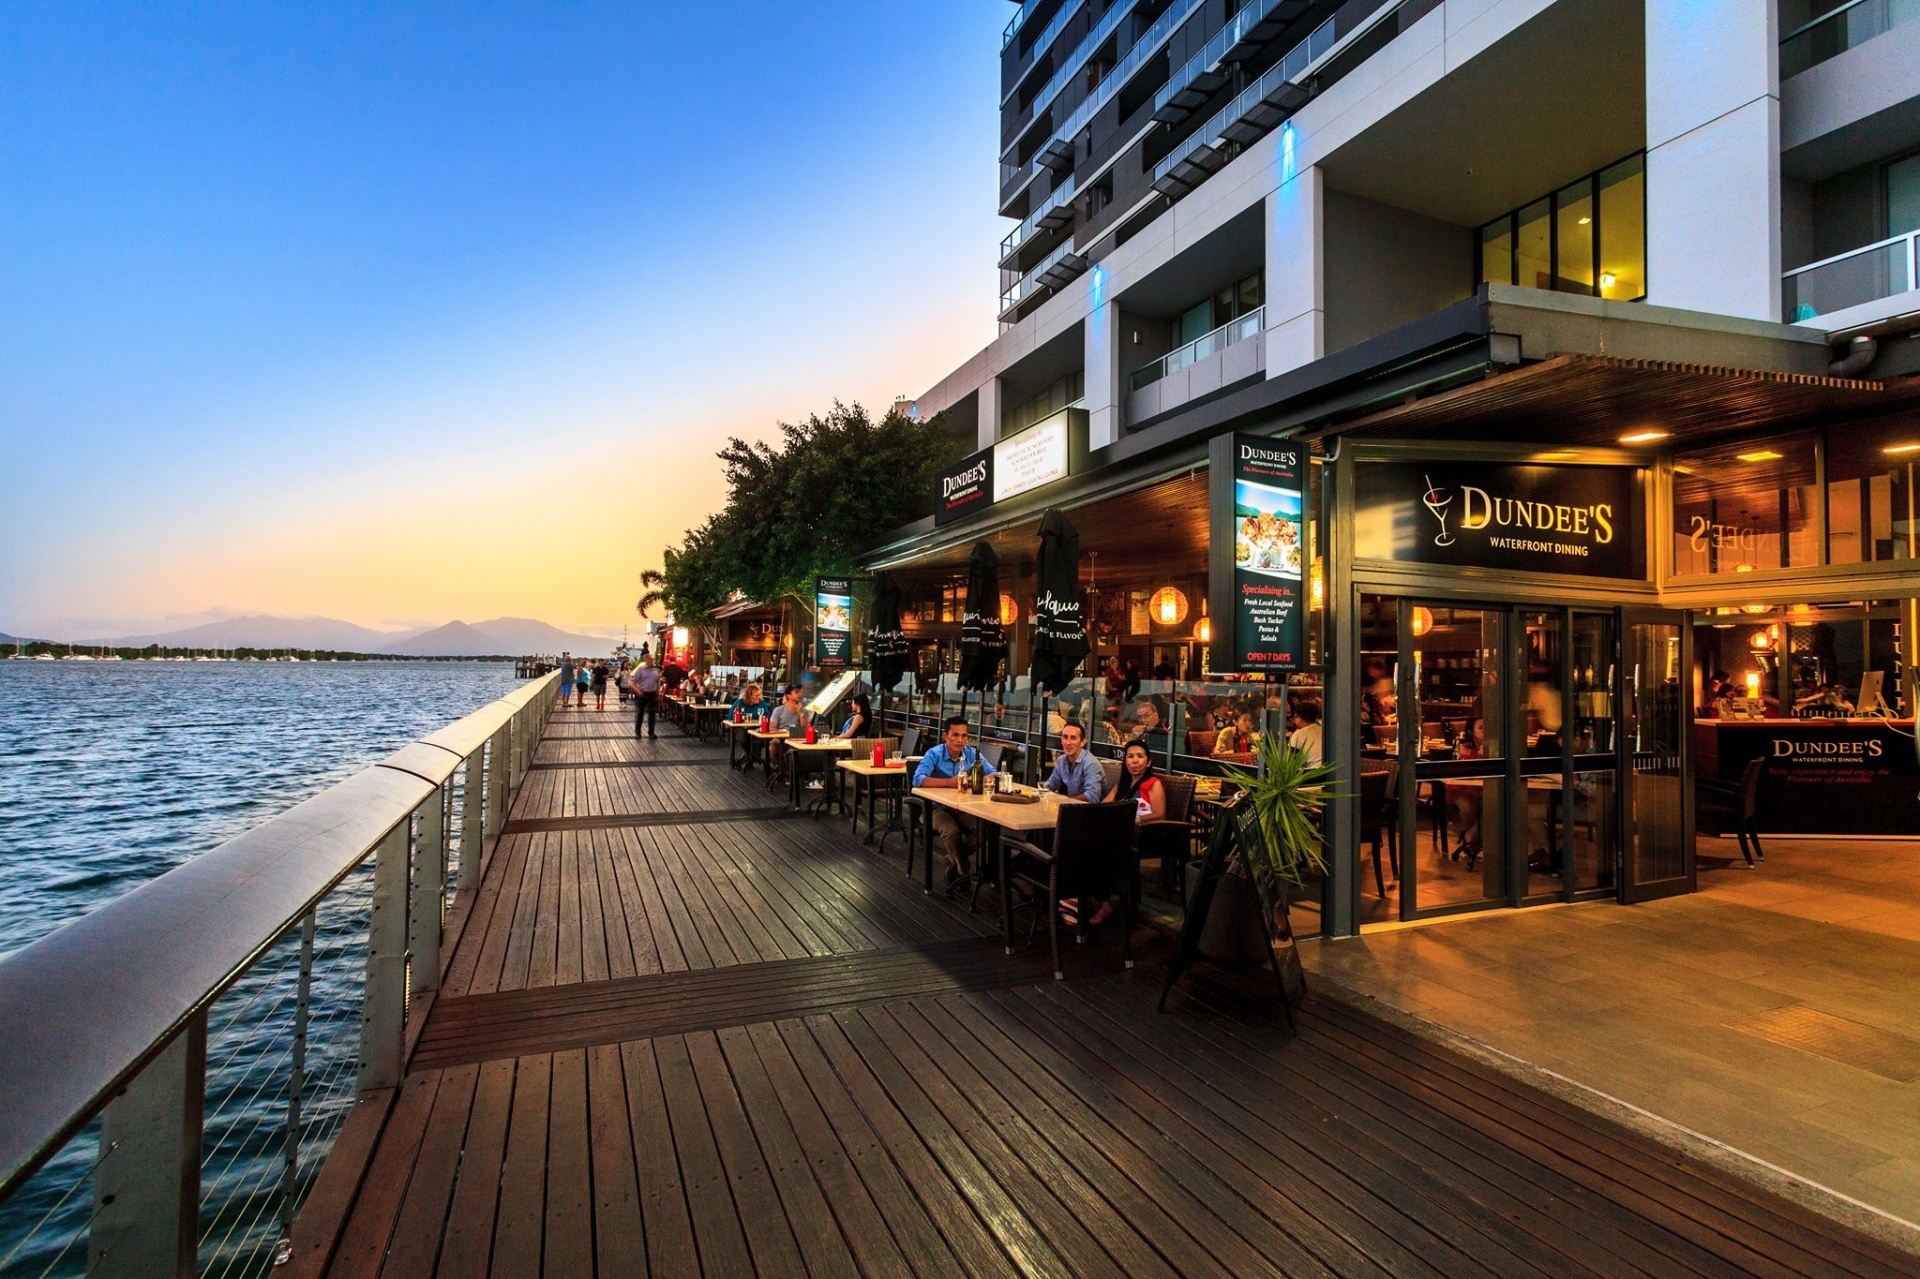 Dundee's Restaurant on the Waterfront - Cairns - Tourism Town - Find